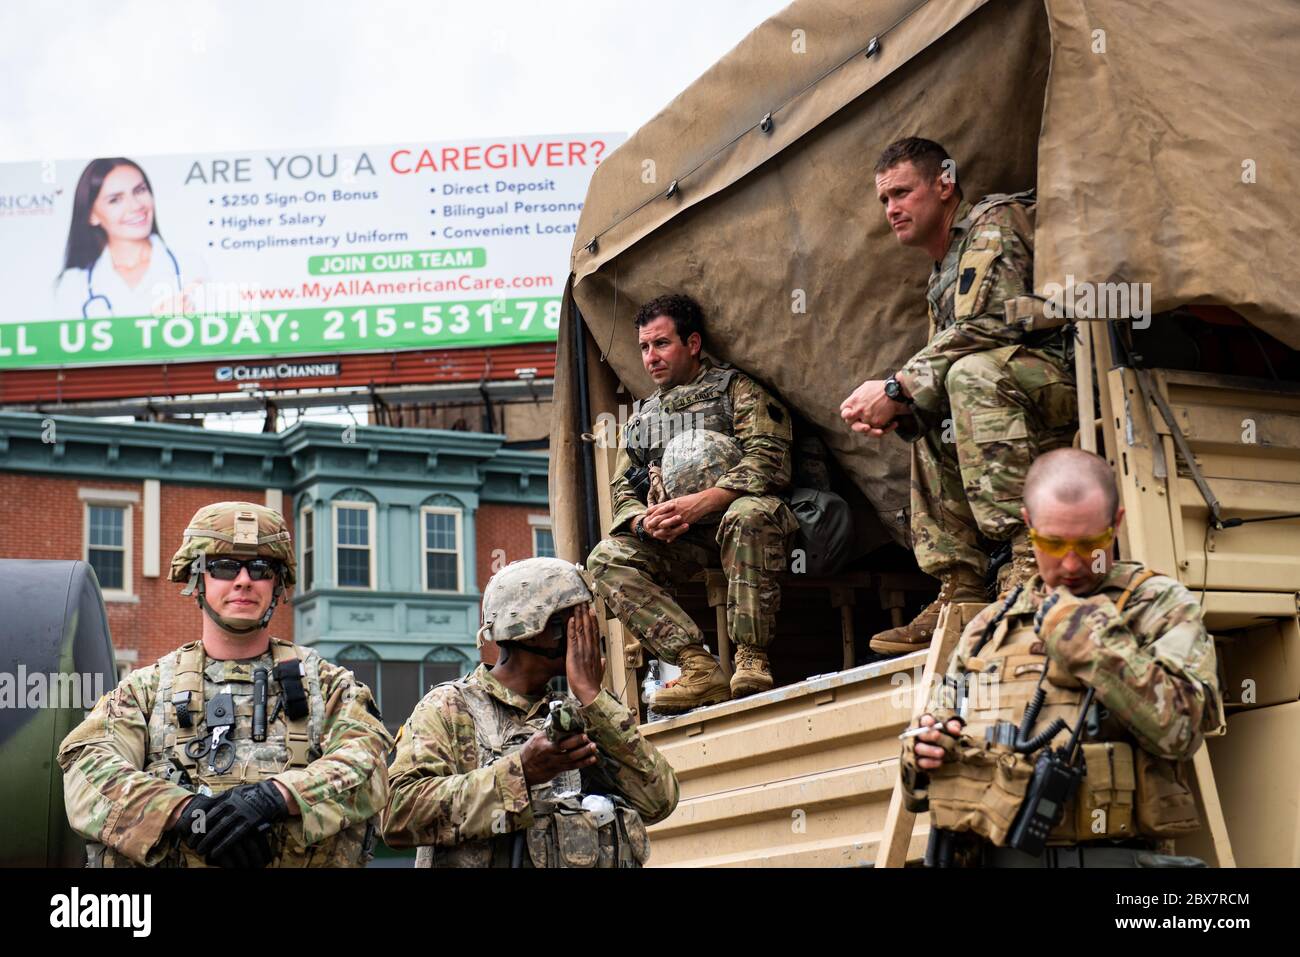 Philadelphia, PA / USA. National Guards stationed in Kensington stand guard during a prayer vigil at the corner of Kensington and Allegheny Avenues. June 04 2020. Credit: Christopher Evens / Alamy Live News Stock Photo